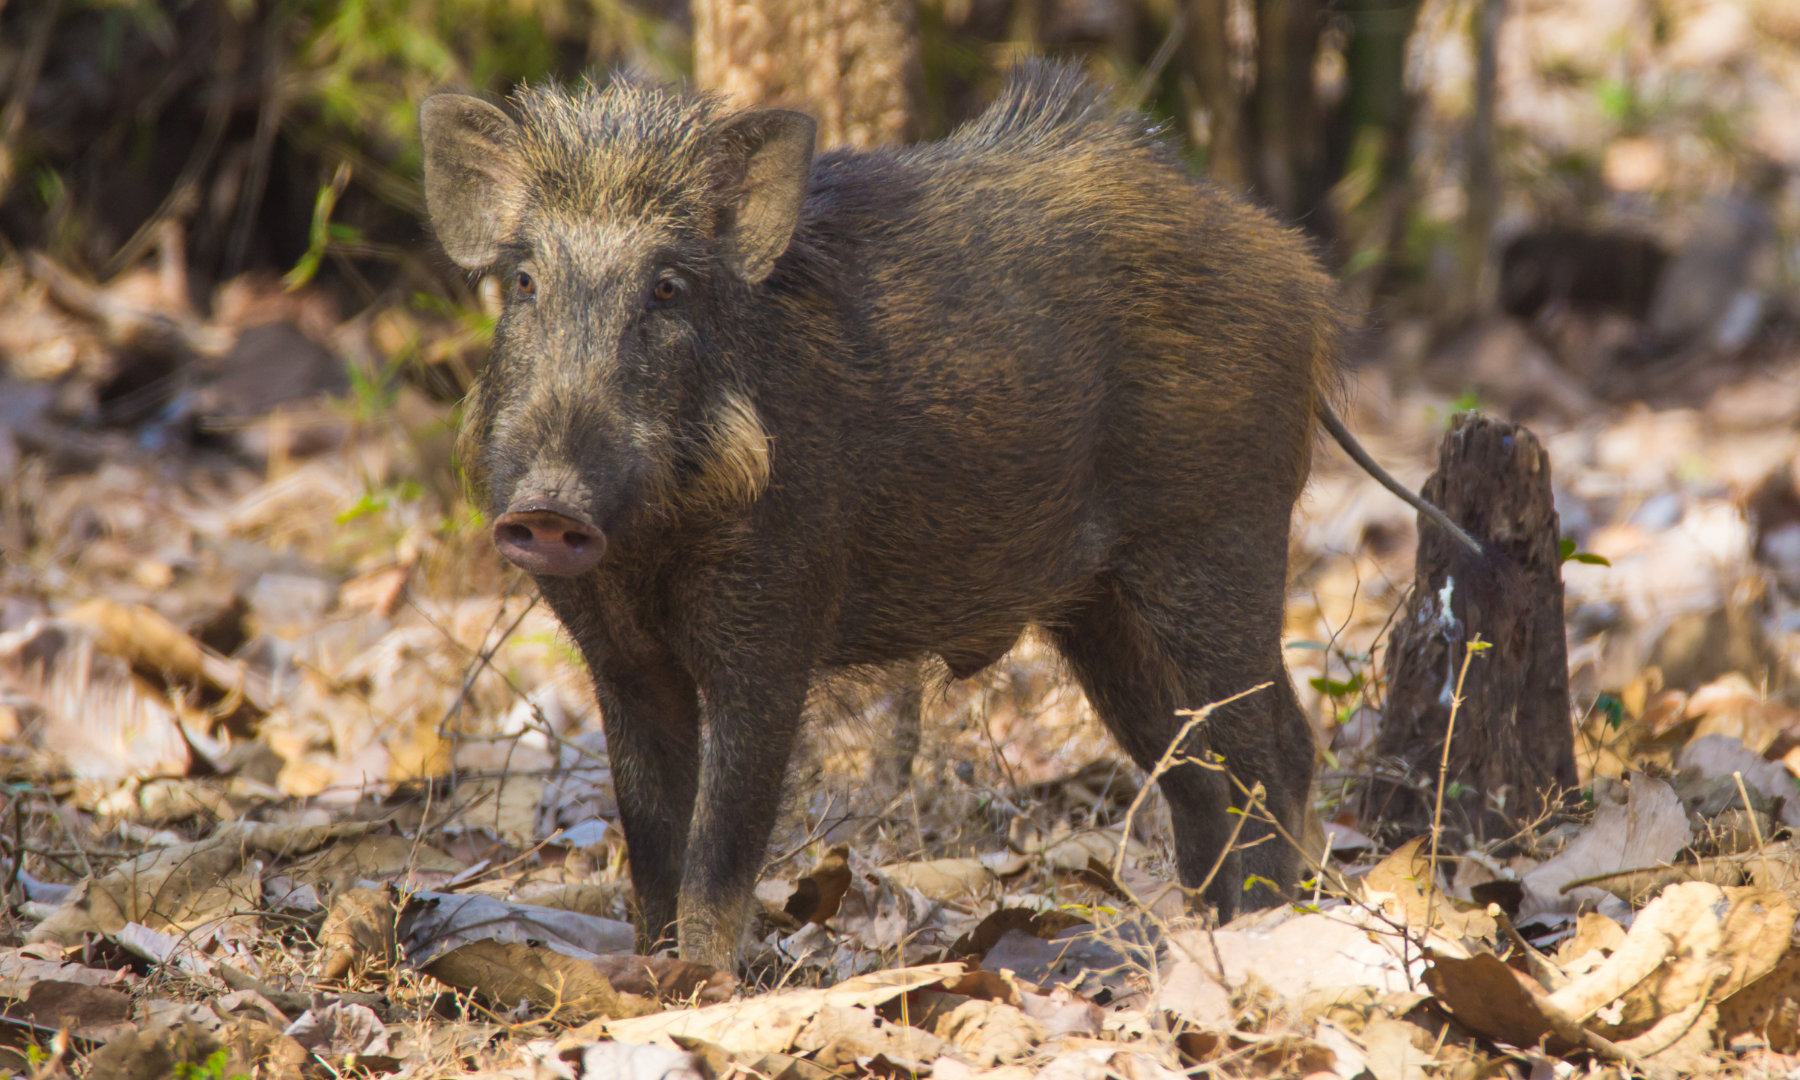 Wild pig who can catch African Swine Fever